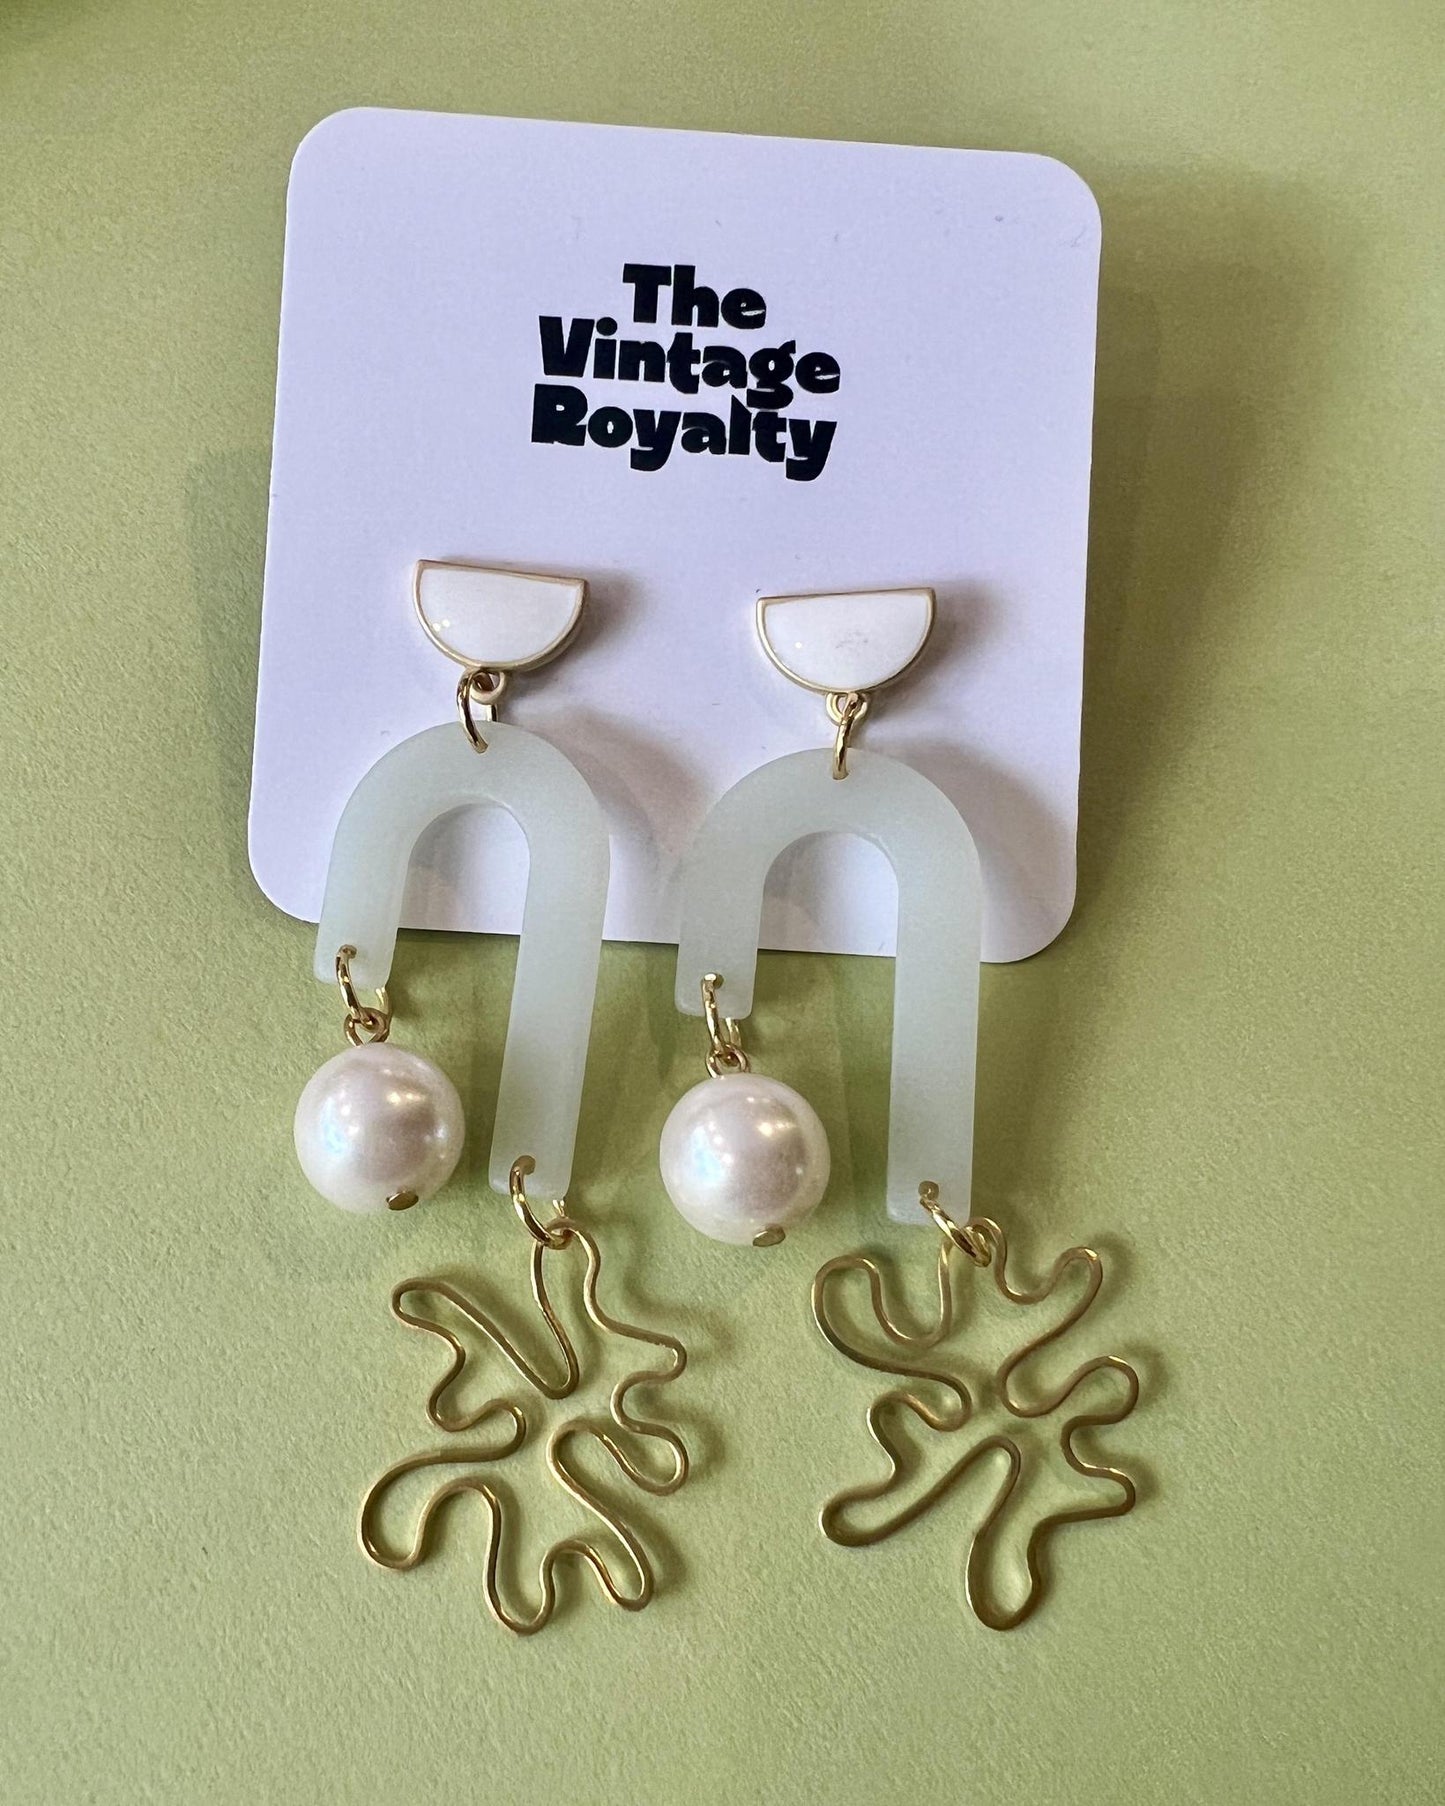 Vintage Royalty The Nima Minty Earring